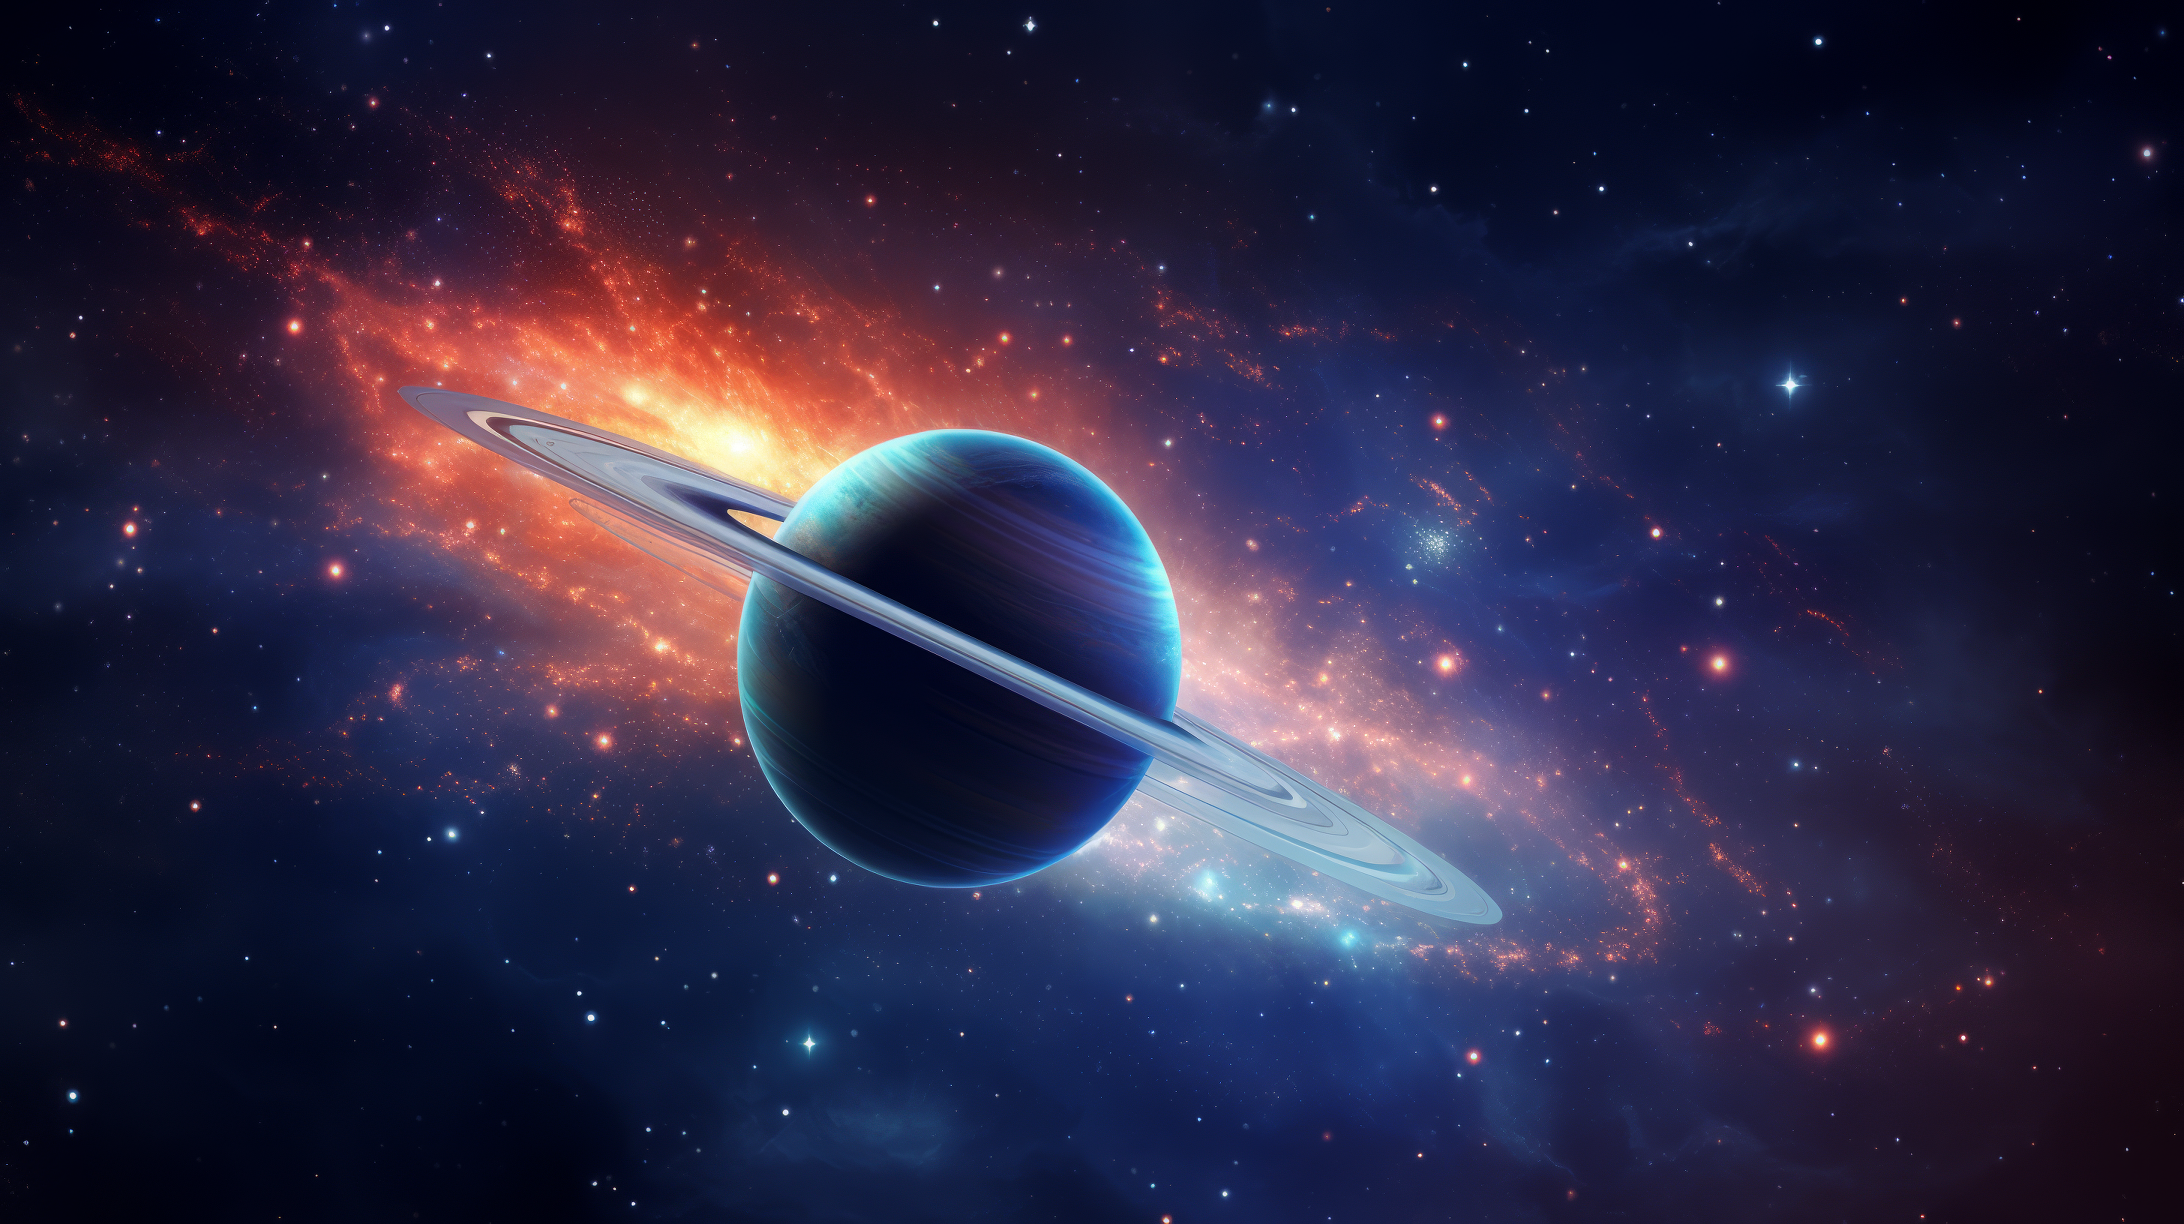 HD wallpaper of Saturn with radiant rings set against a vibrant starry universe background.